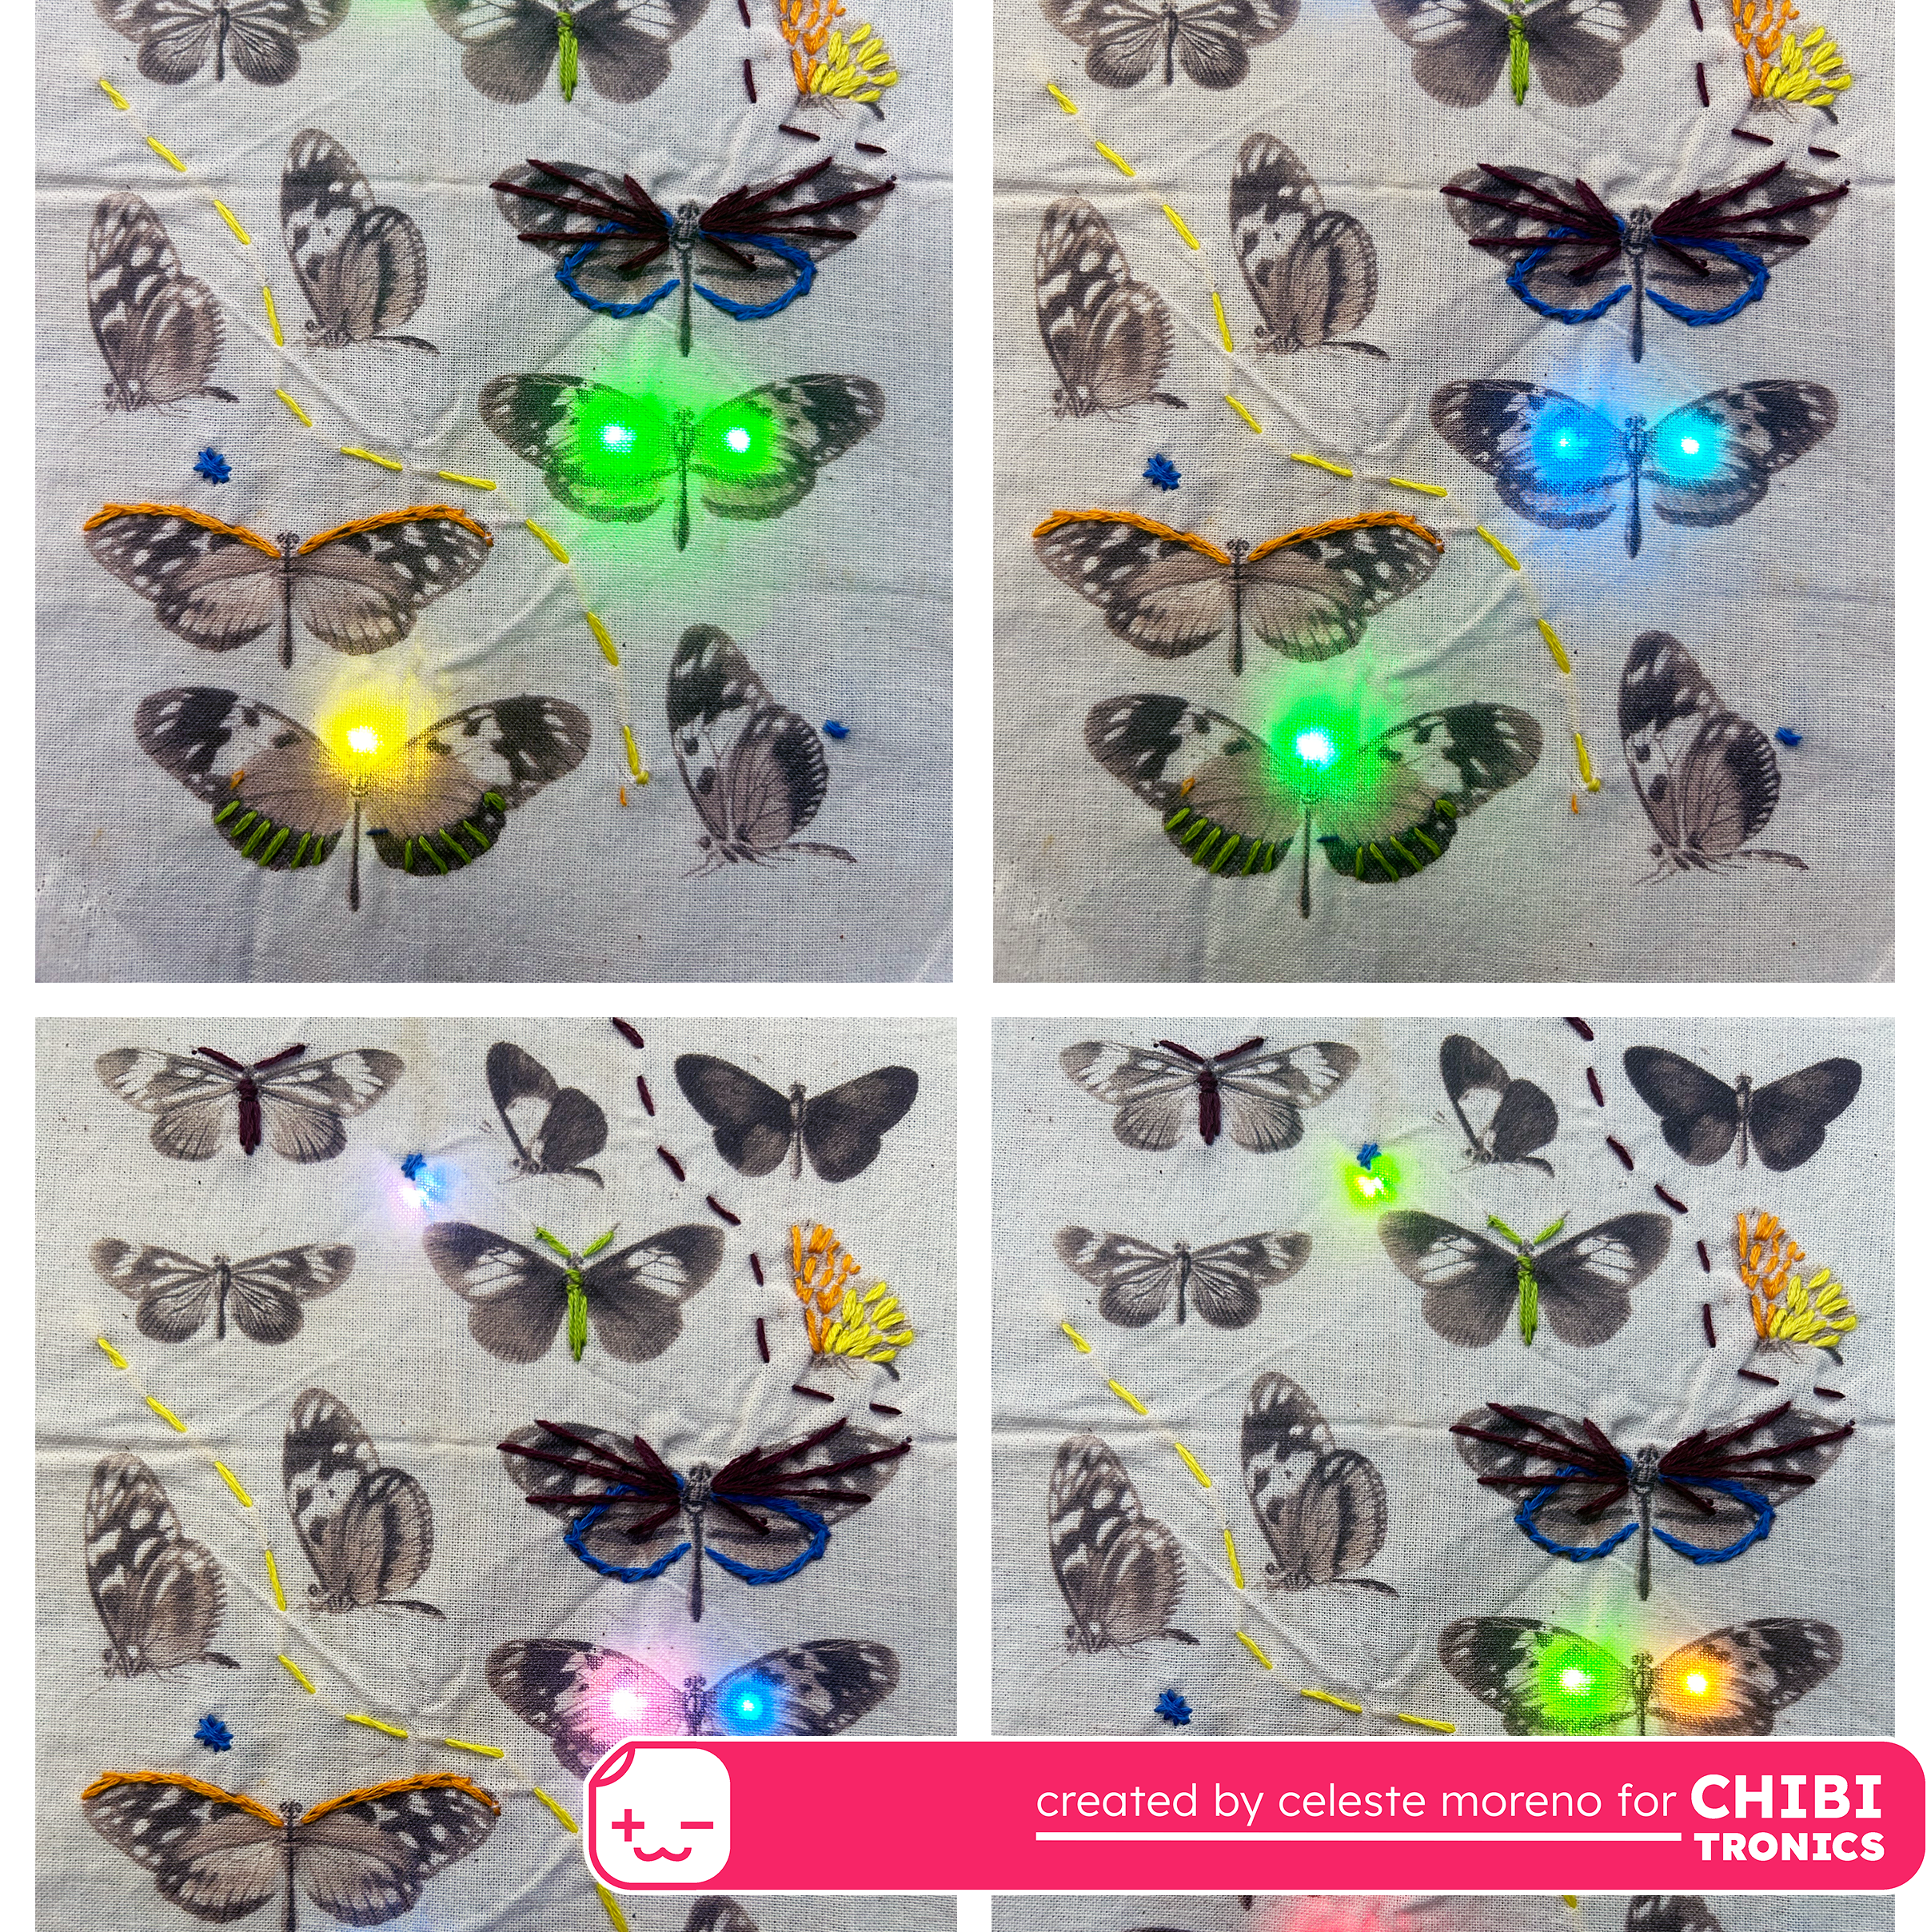 Combining Chibitronics LED Stickers with Embroidered Fabric Designs